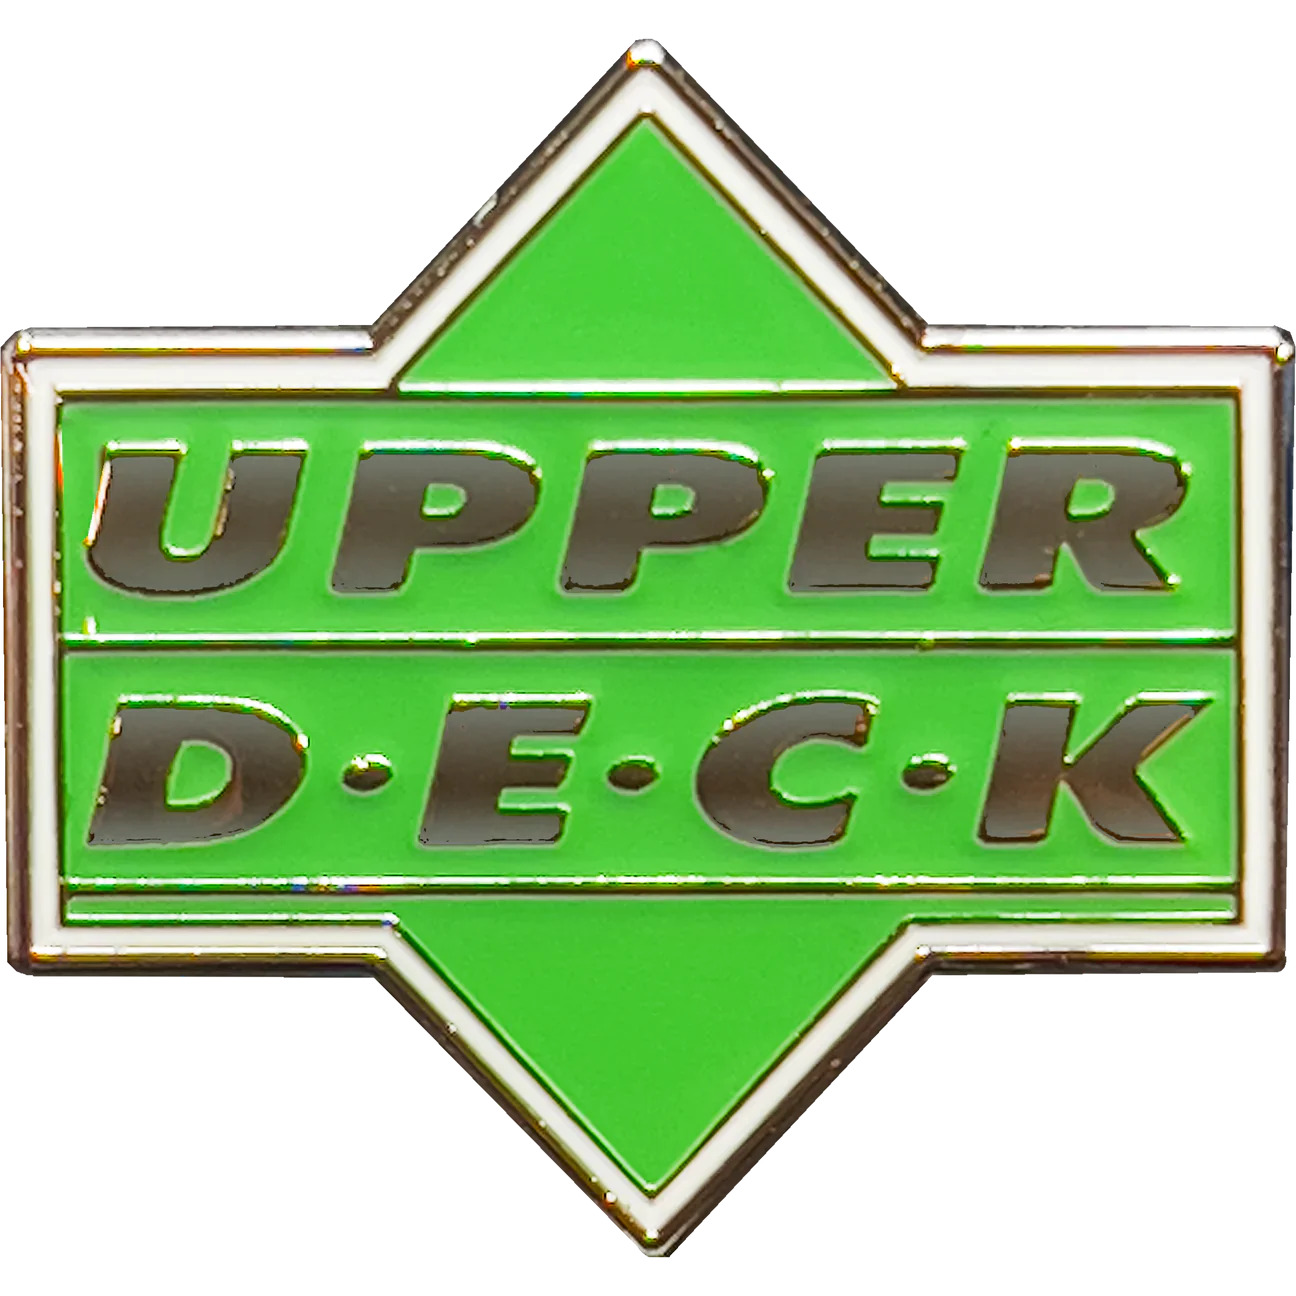 Upper Deck Lapel Pin Inaugural Trading Cards released 1989 PBX-007-C P-238